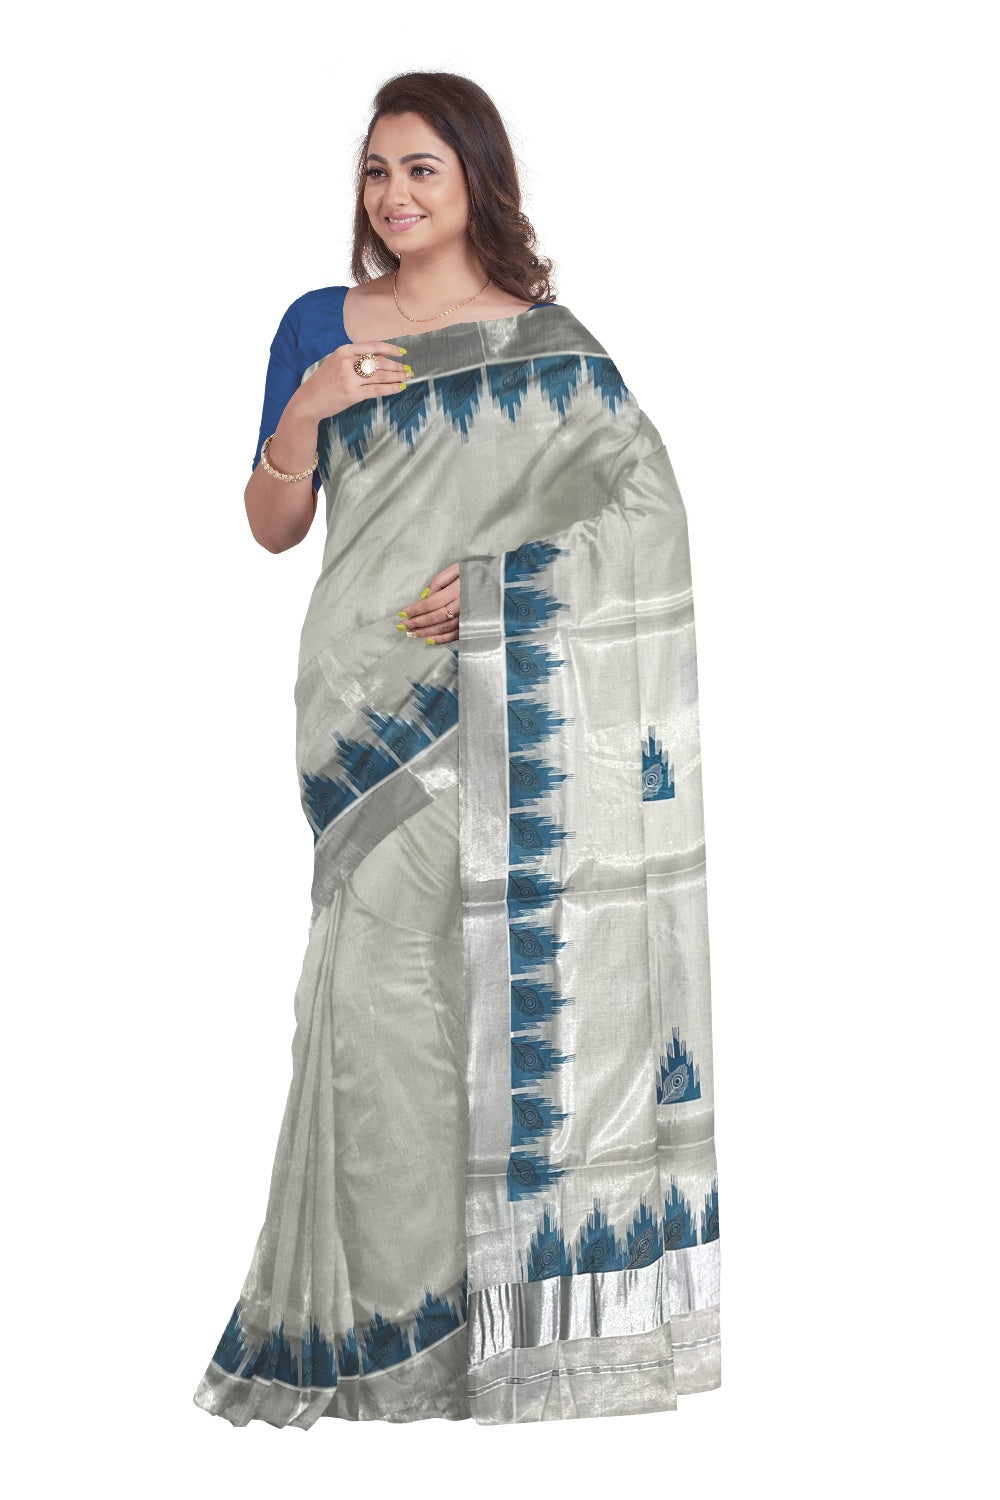 Kerala Silver Tissue Saree with Peacock Feather Mural along with Blue Temple Print